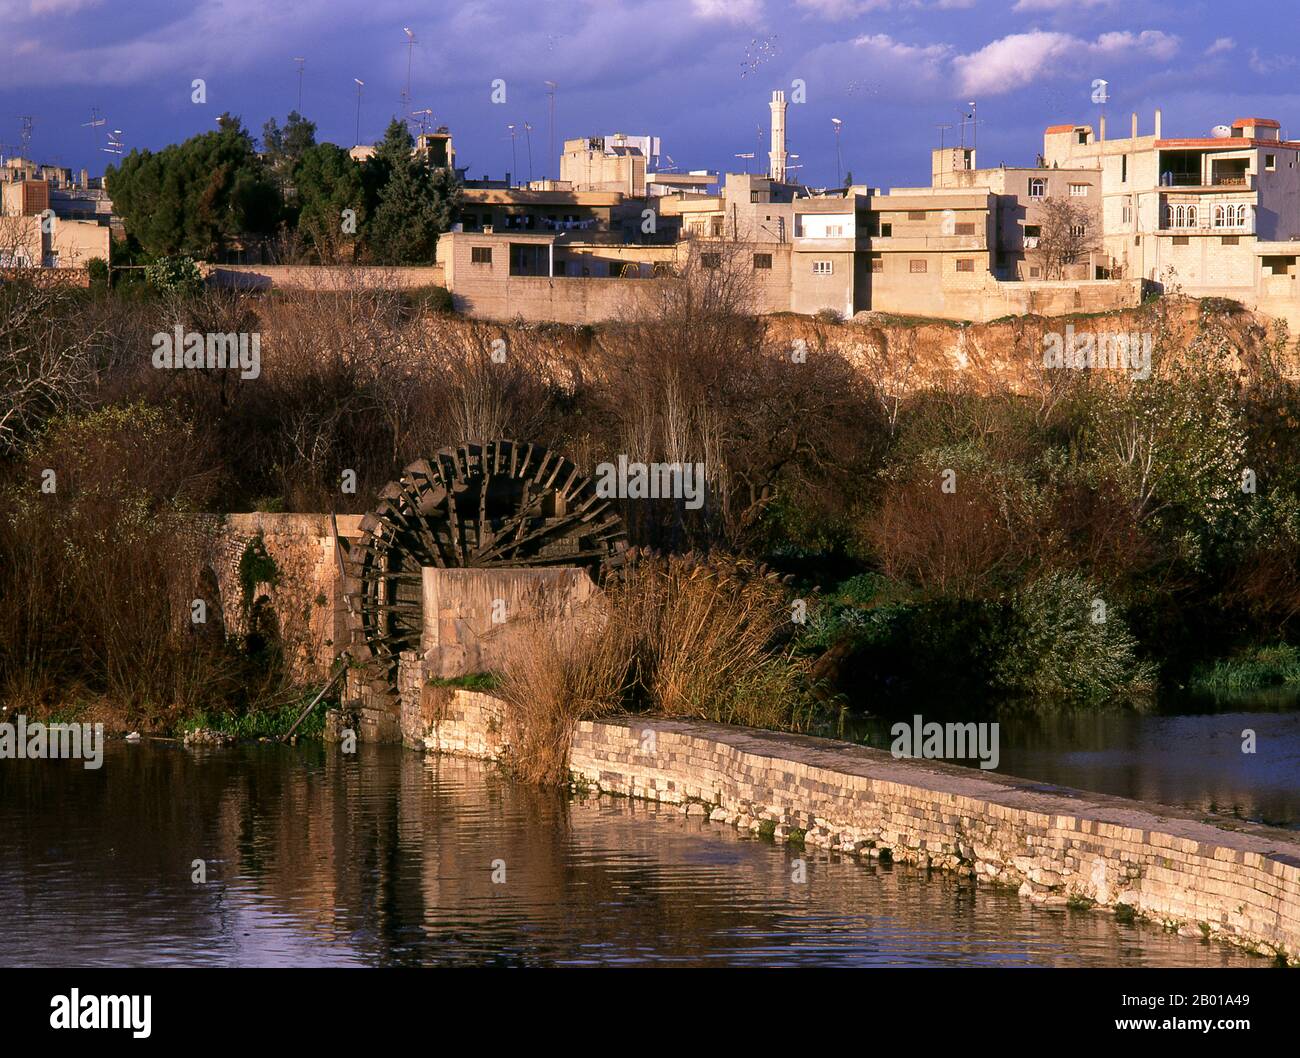 Syria: A 12th-13th century noria or giant waterwheel on the banks of the Orontes River, Hama.  A noria is a machine for lifting water into a small aqueduct for the purpose of irrigation.  Hama is the location of the historical city of Hamath. In 1982 it was the scene of the worst massacre in modern Arab history. President Hafaz al-Assad ordered his brother Rifaat al-Assad to quell a Sunni Islamist revolt in the city. An estimated 25,000 to 30,000 people were massacred. Stock Photo